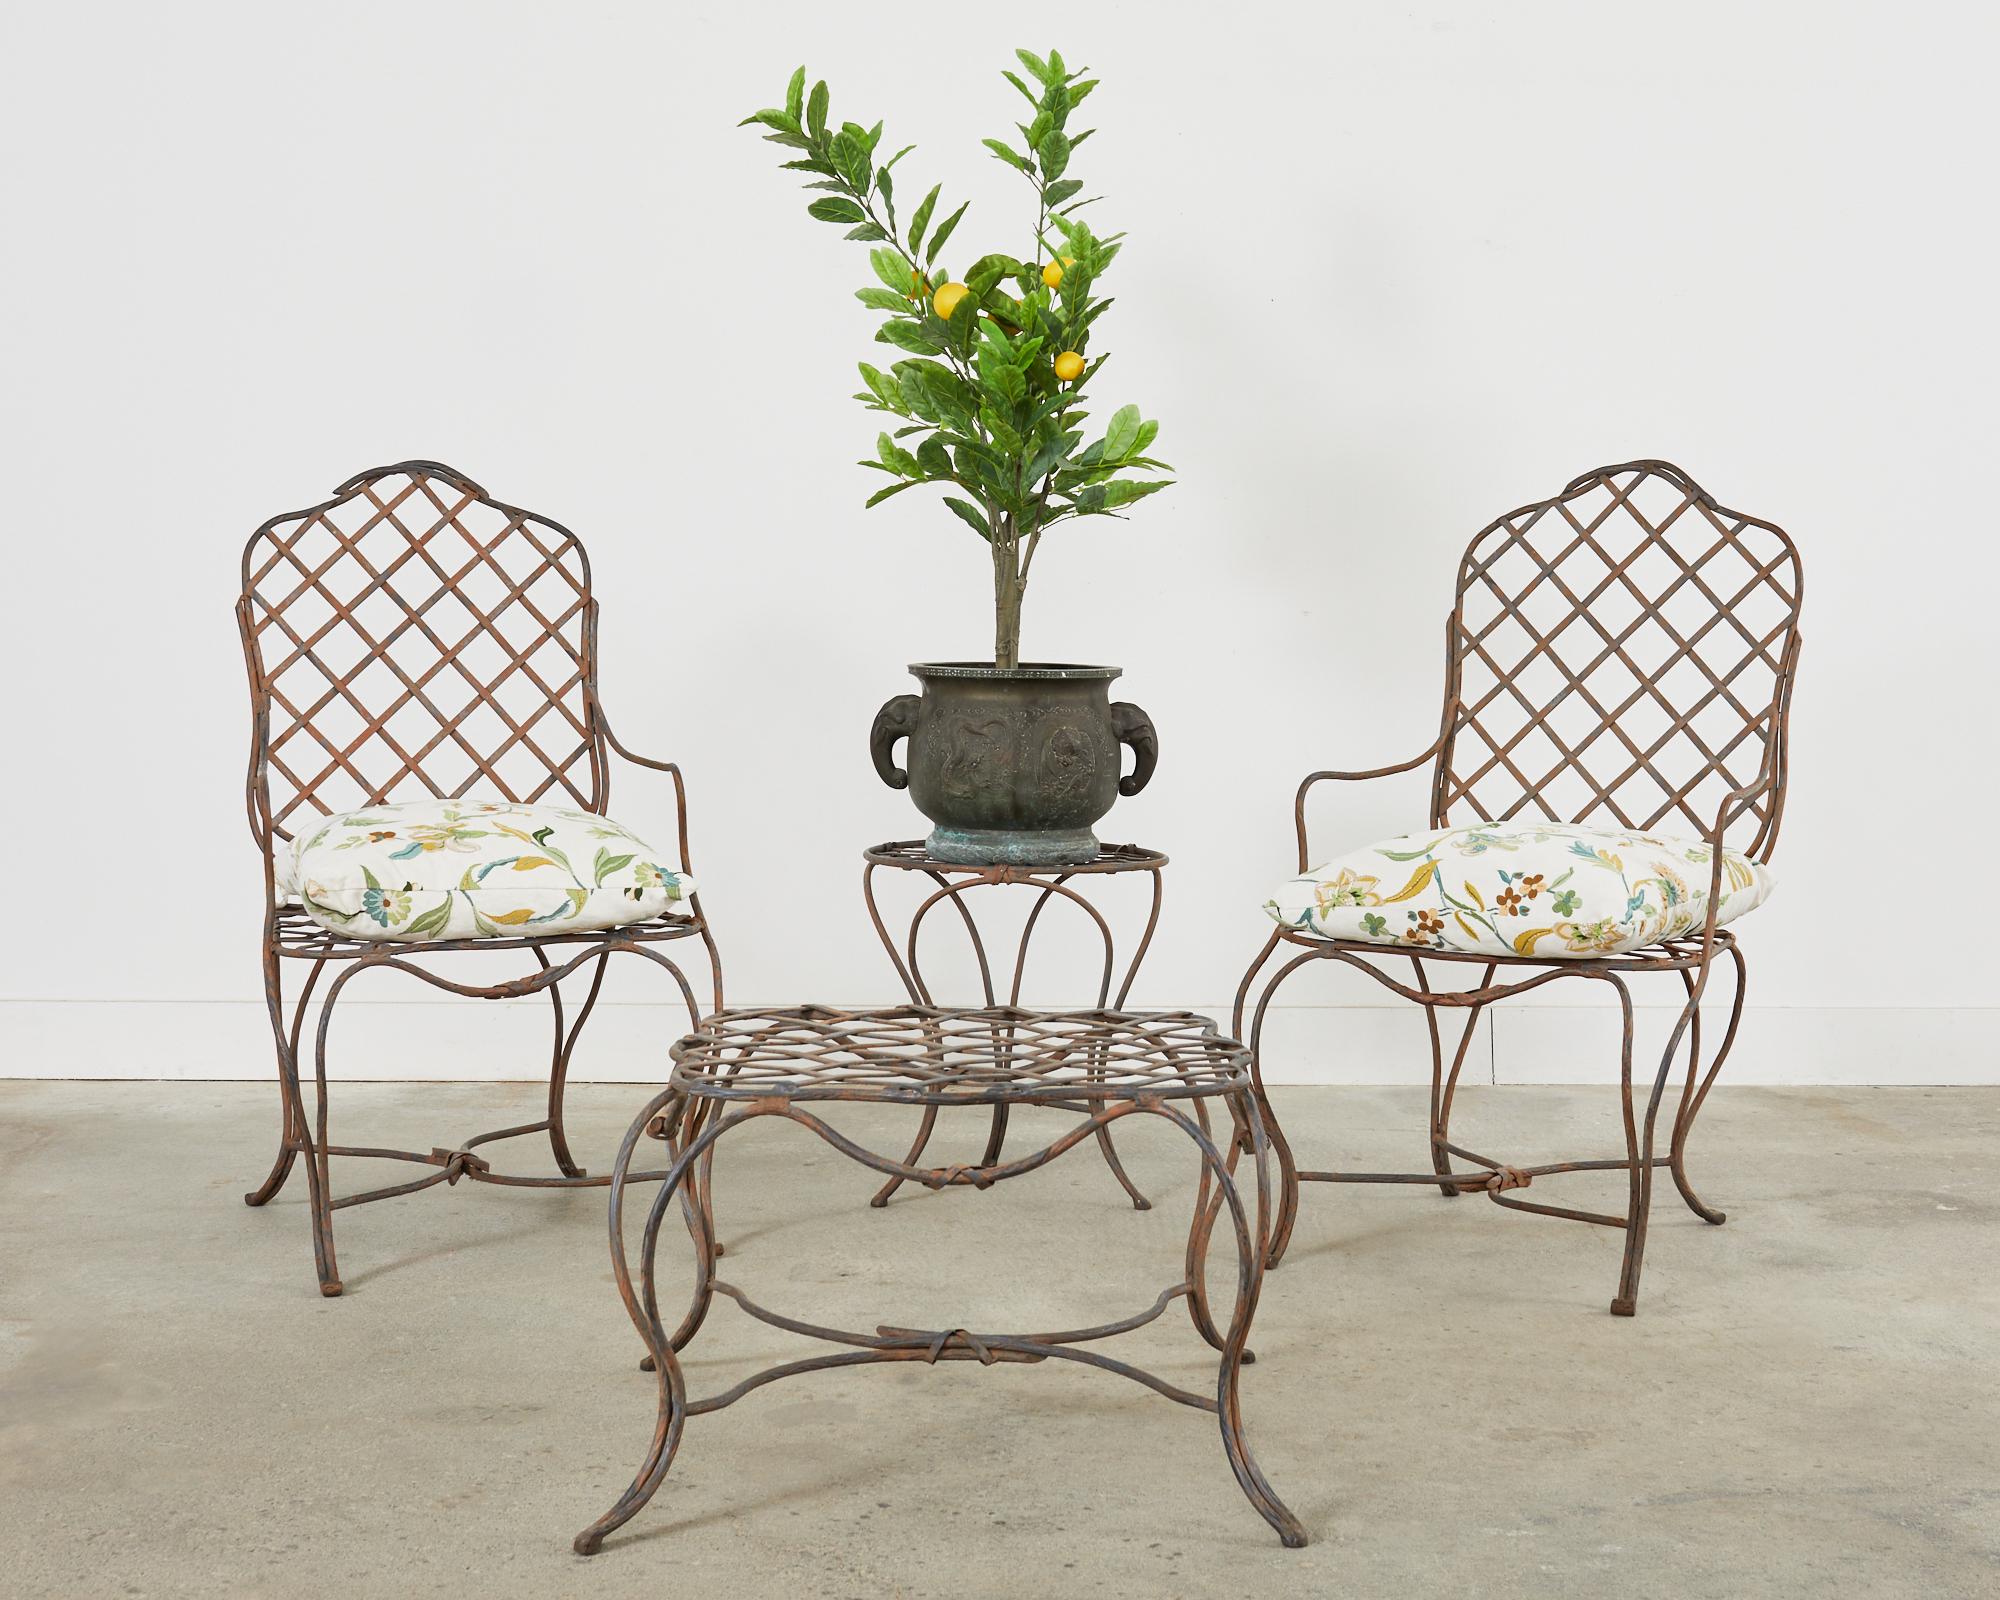 Gorgeous neoclassical style iron patio and garden side table or drink table. Made in the iconic style and manner of Rose Tarlow Melrose House, Los Angeles, CA. The table features an iron frame with a faux bois twig finish. The frame is inset on the